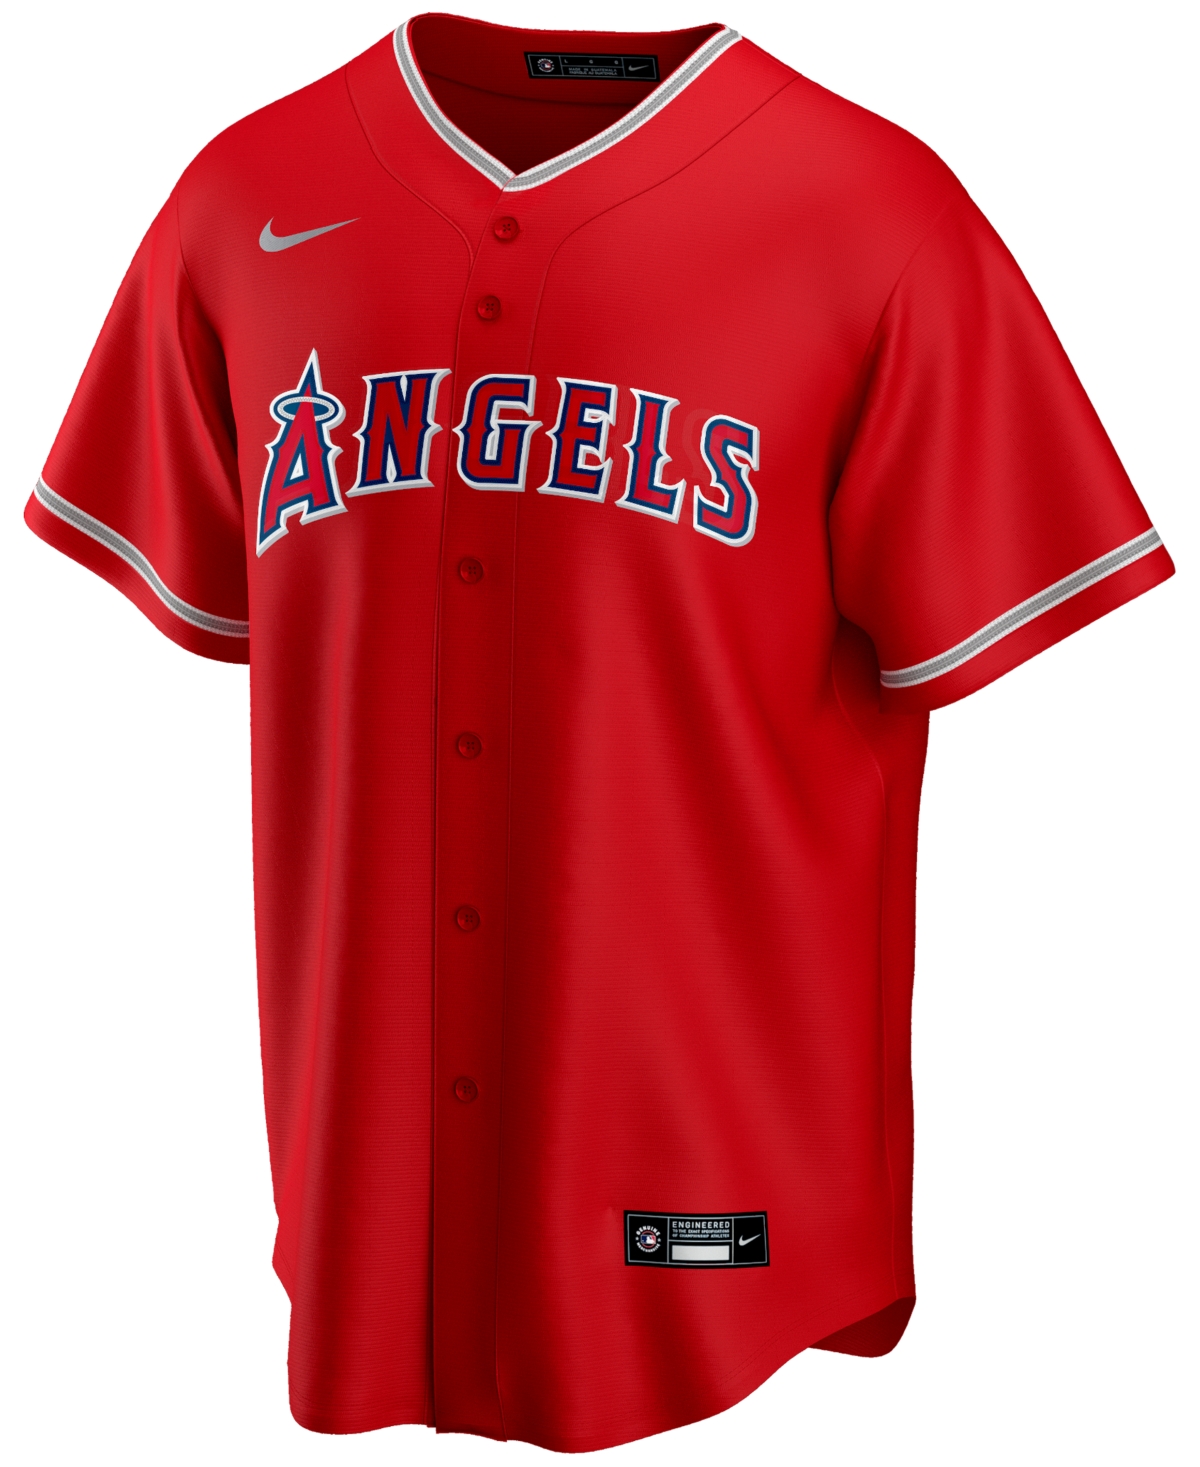 Nike Men's Los Angeles Angels Official Blank Replica Jersey